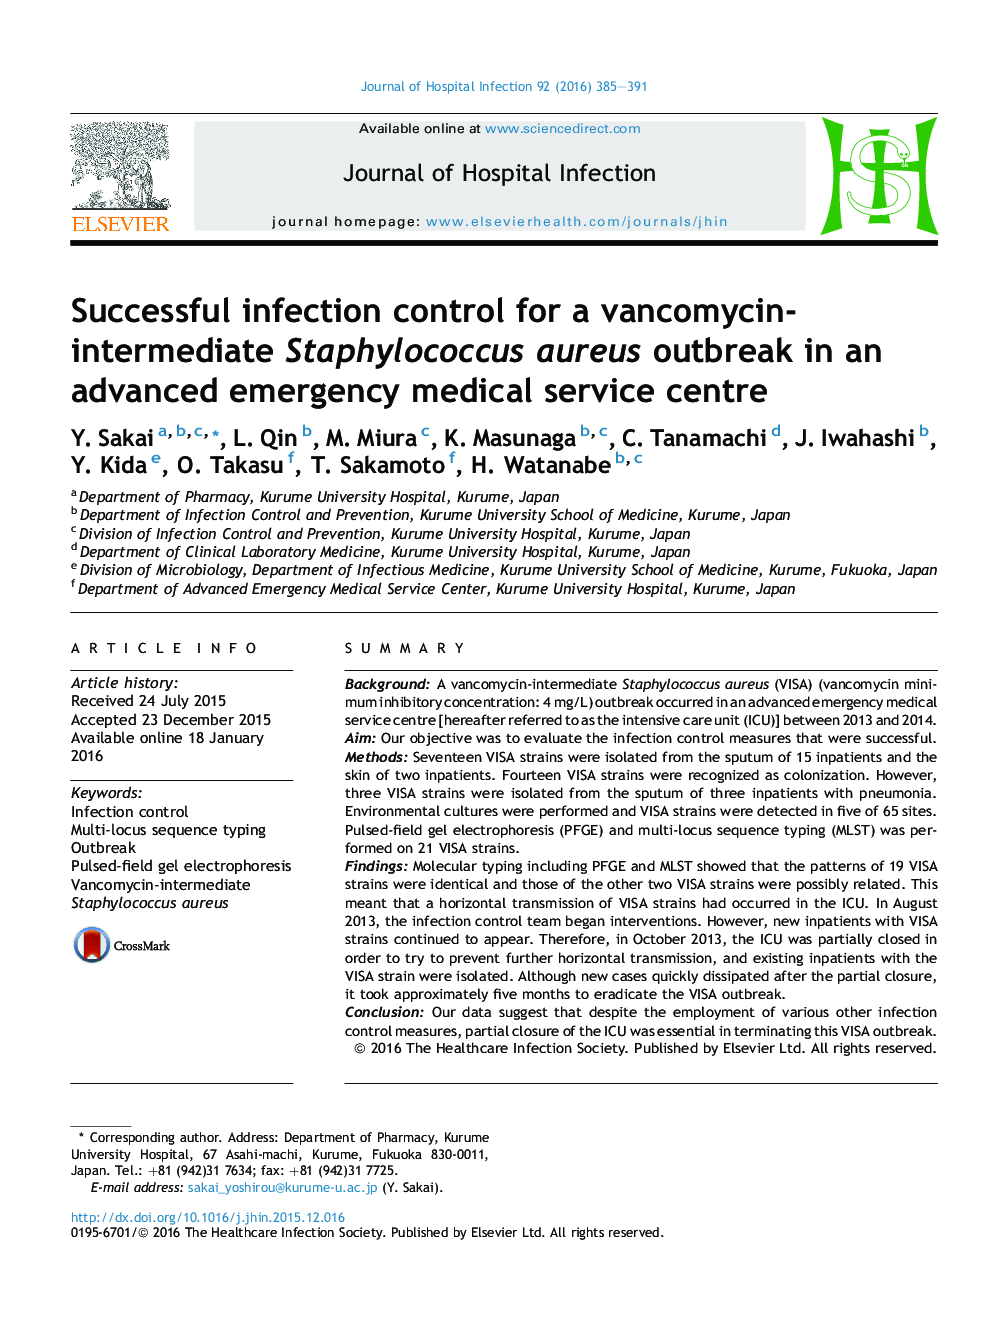 Successful infection control for a vancomycin-intermediate Staphylococcus aureus outbreak in an advanced emergency medical service centre